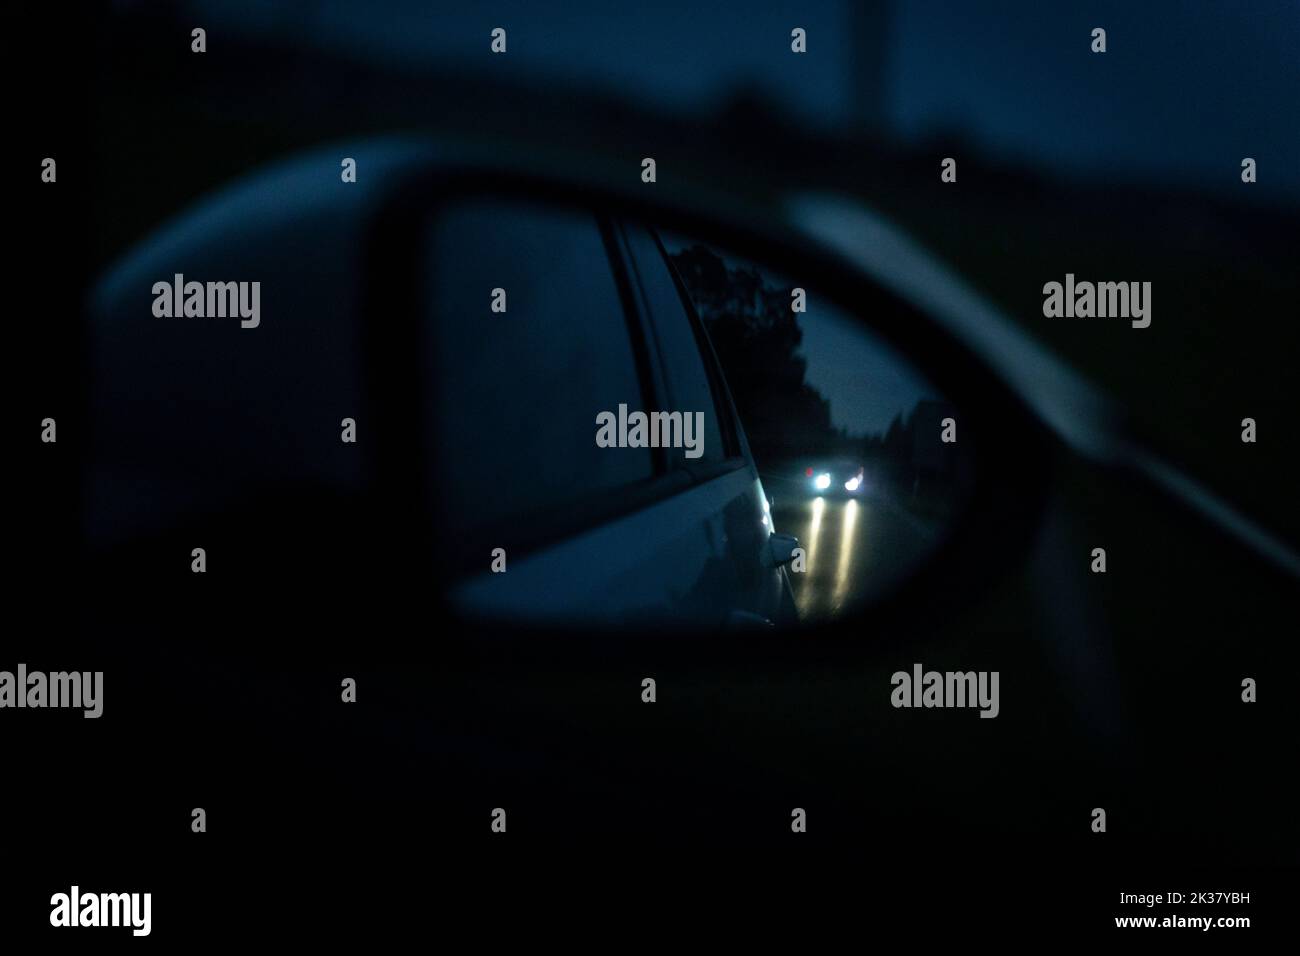 23 September 2022: View Through The Rearview Mirror Of A Moving Car At Night. Symbol Image Traffic At Night, Accident And Overtaking Stock Photo